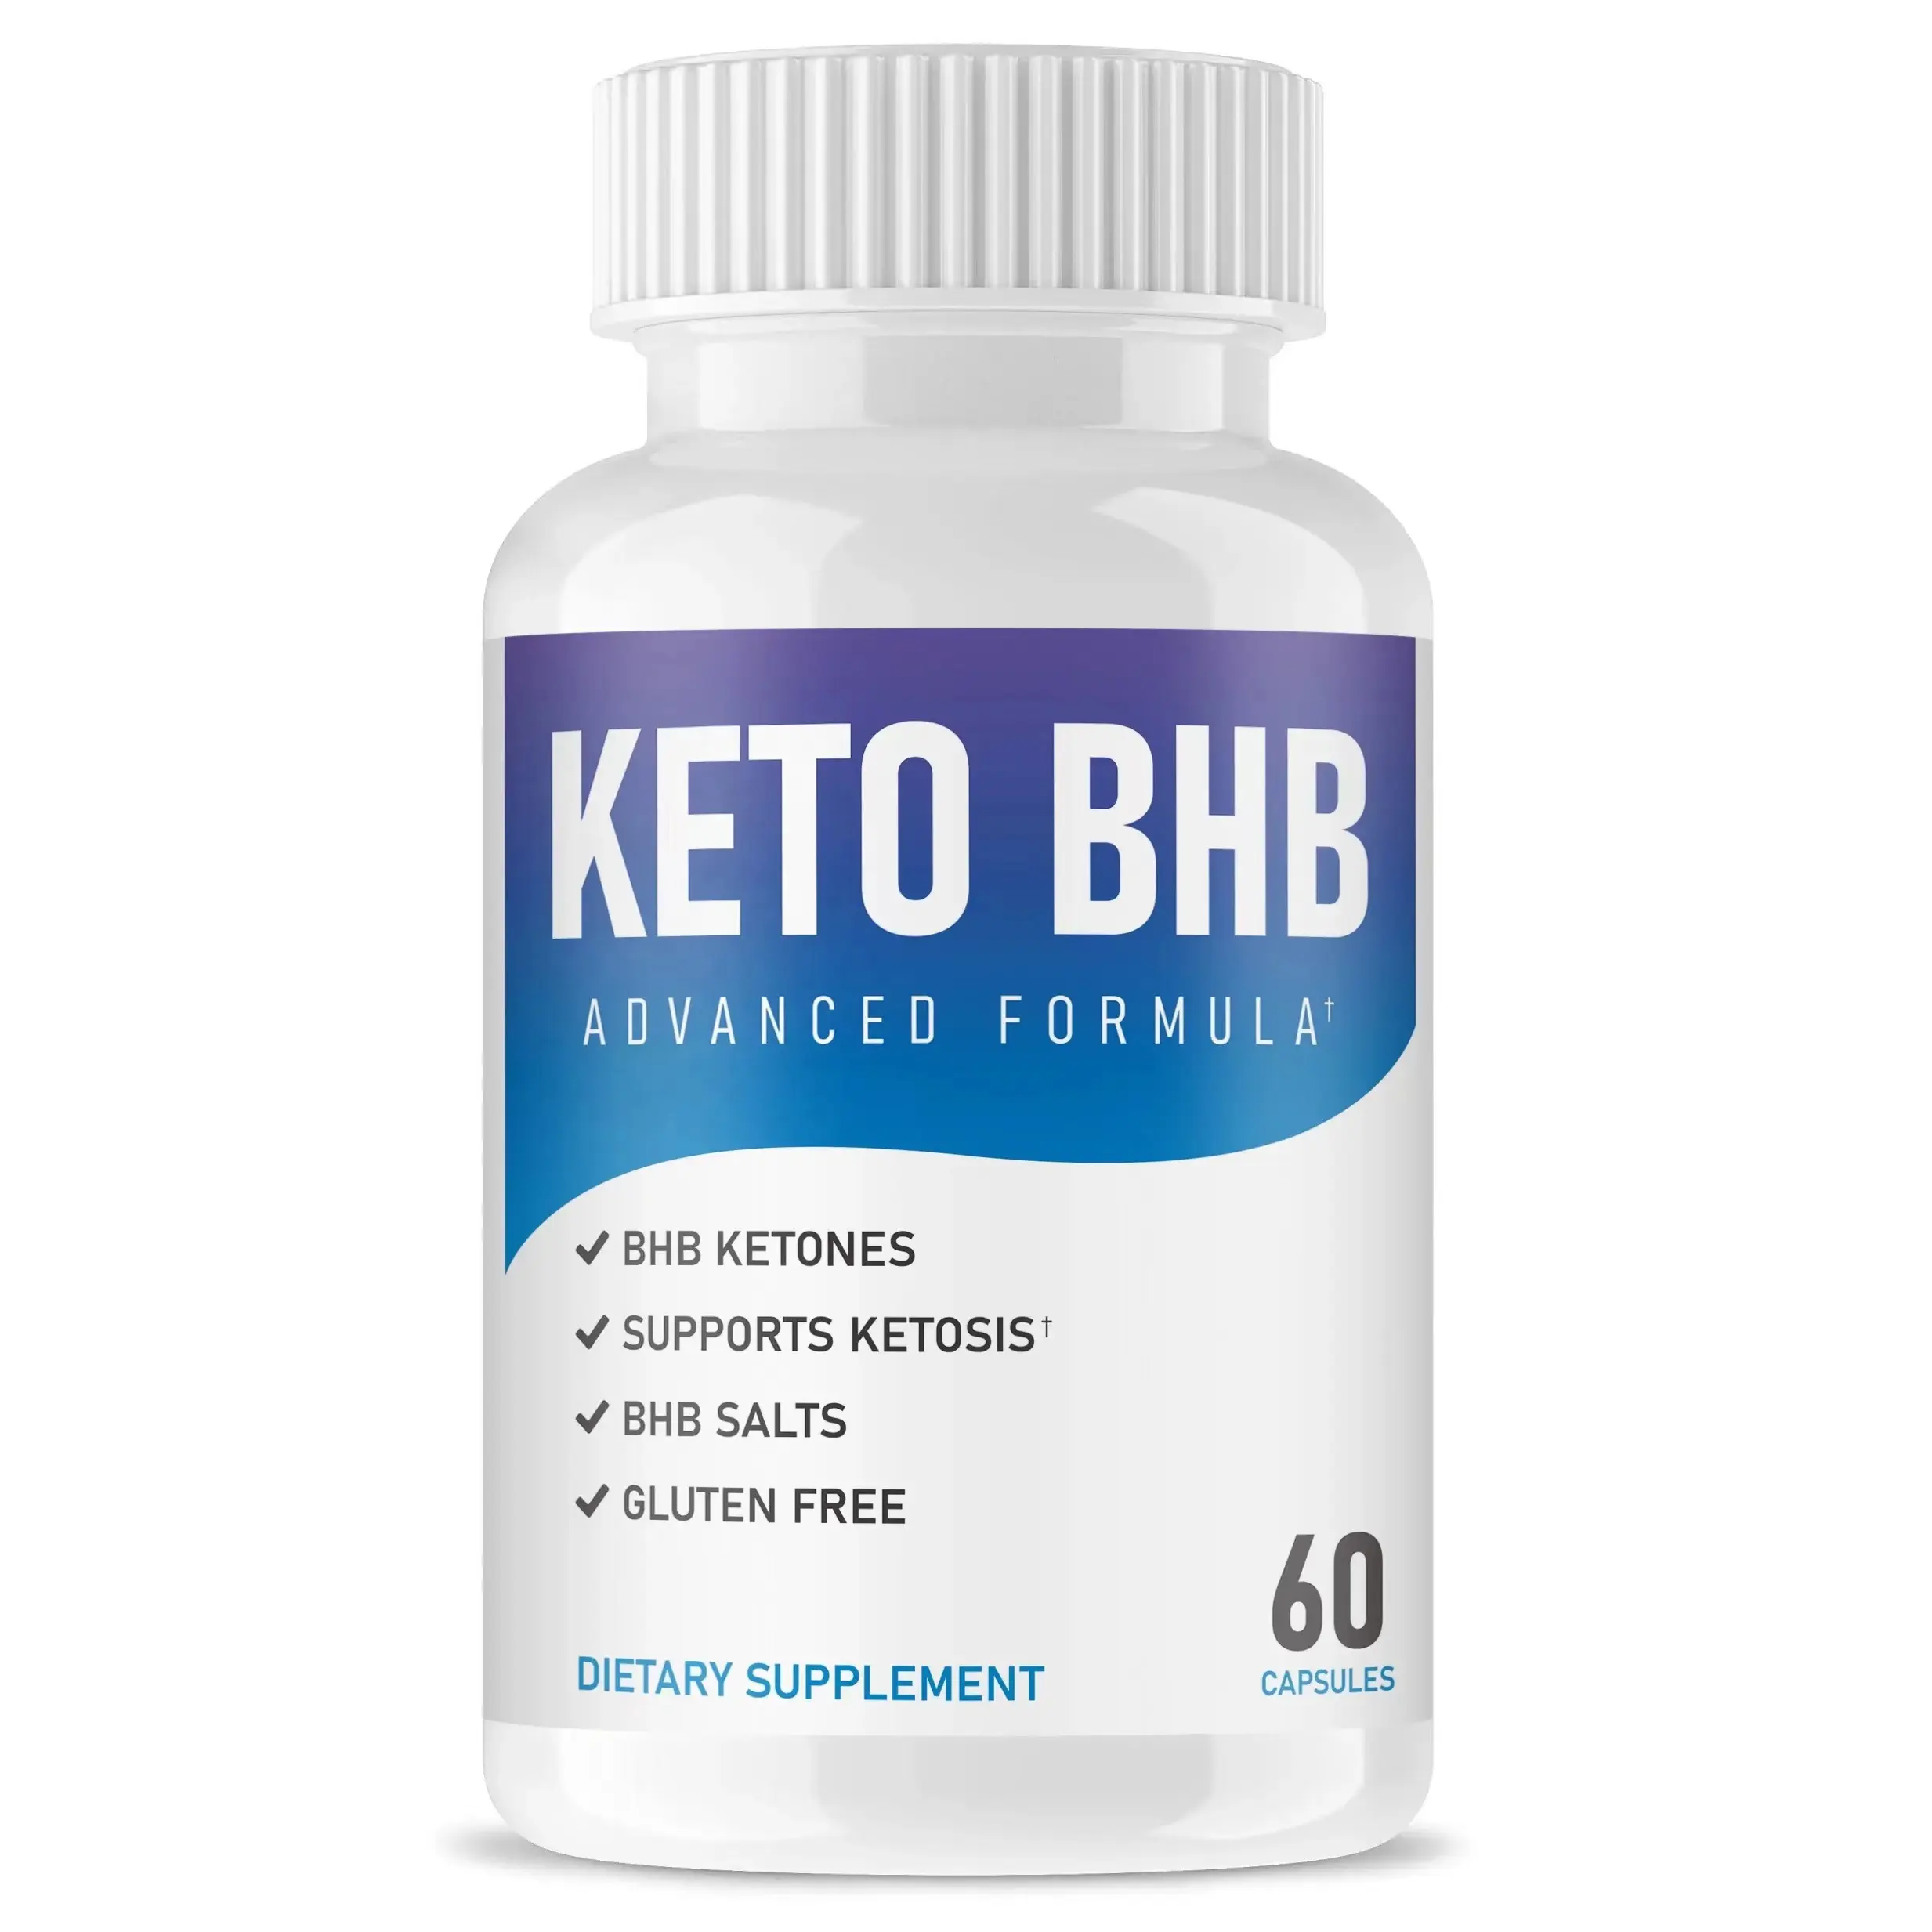 OEM PRIVATE LABEL BHB KETONES Weight Loss And Control Weight Cut Sugar Carbohydrate Blocker Fat Loss Keto Coffee